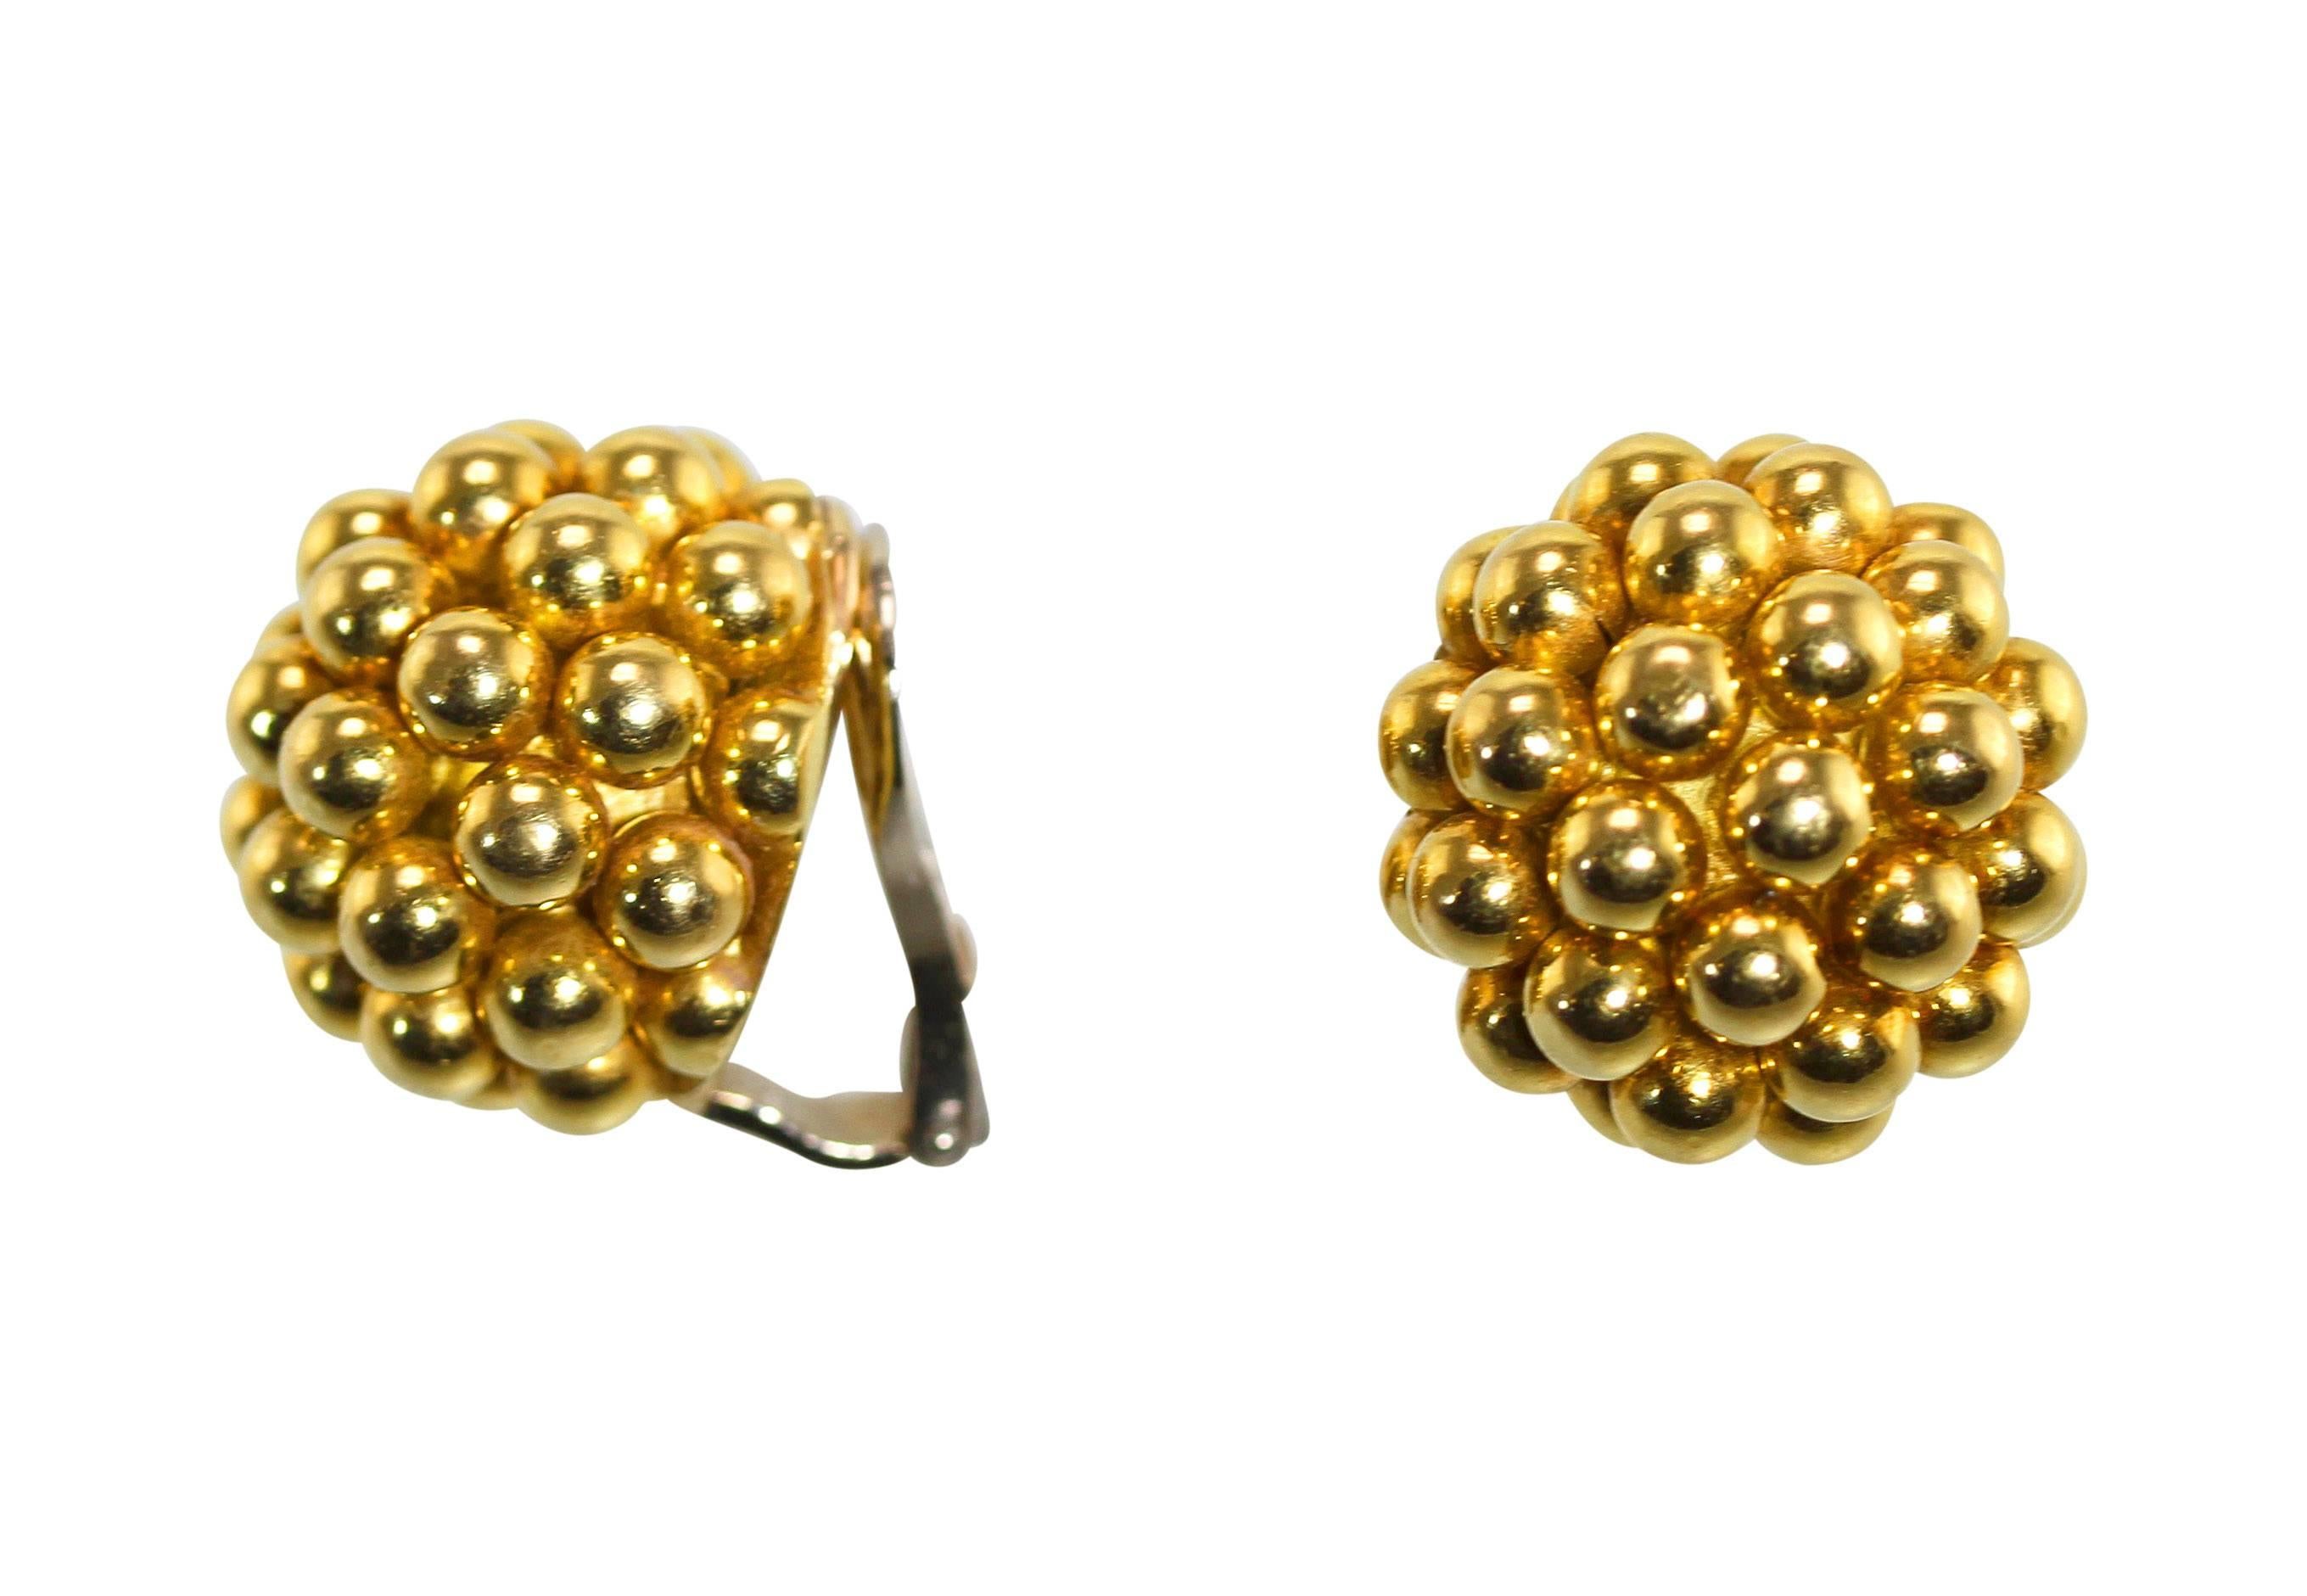 A pair of 18 karat yellow gold earclips by Cartier, Italy, circa 1970, designed as multiple polished gold spheres set together to make a large dome earring, measuring 3/4 by 3/4 inch, gross weight 25.4 grams, signed Cartier, Italy, numbered 55379.